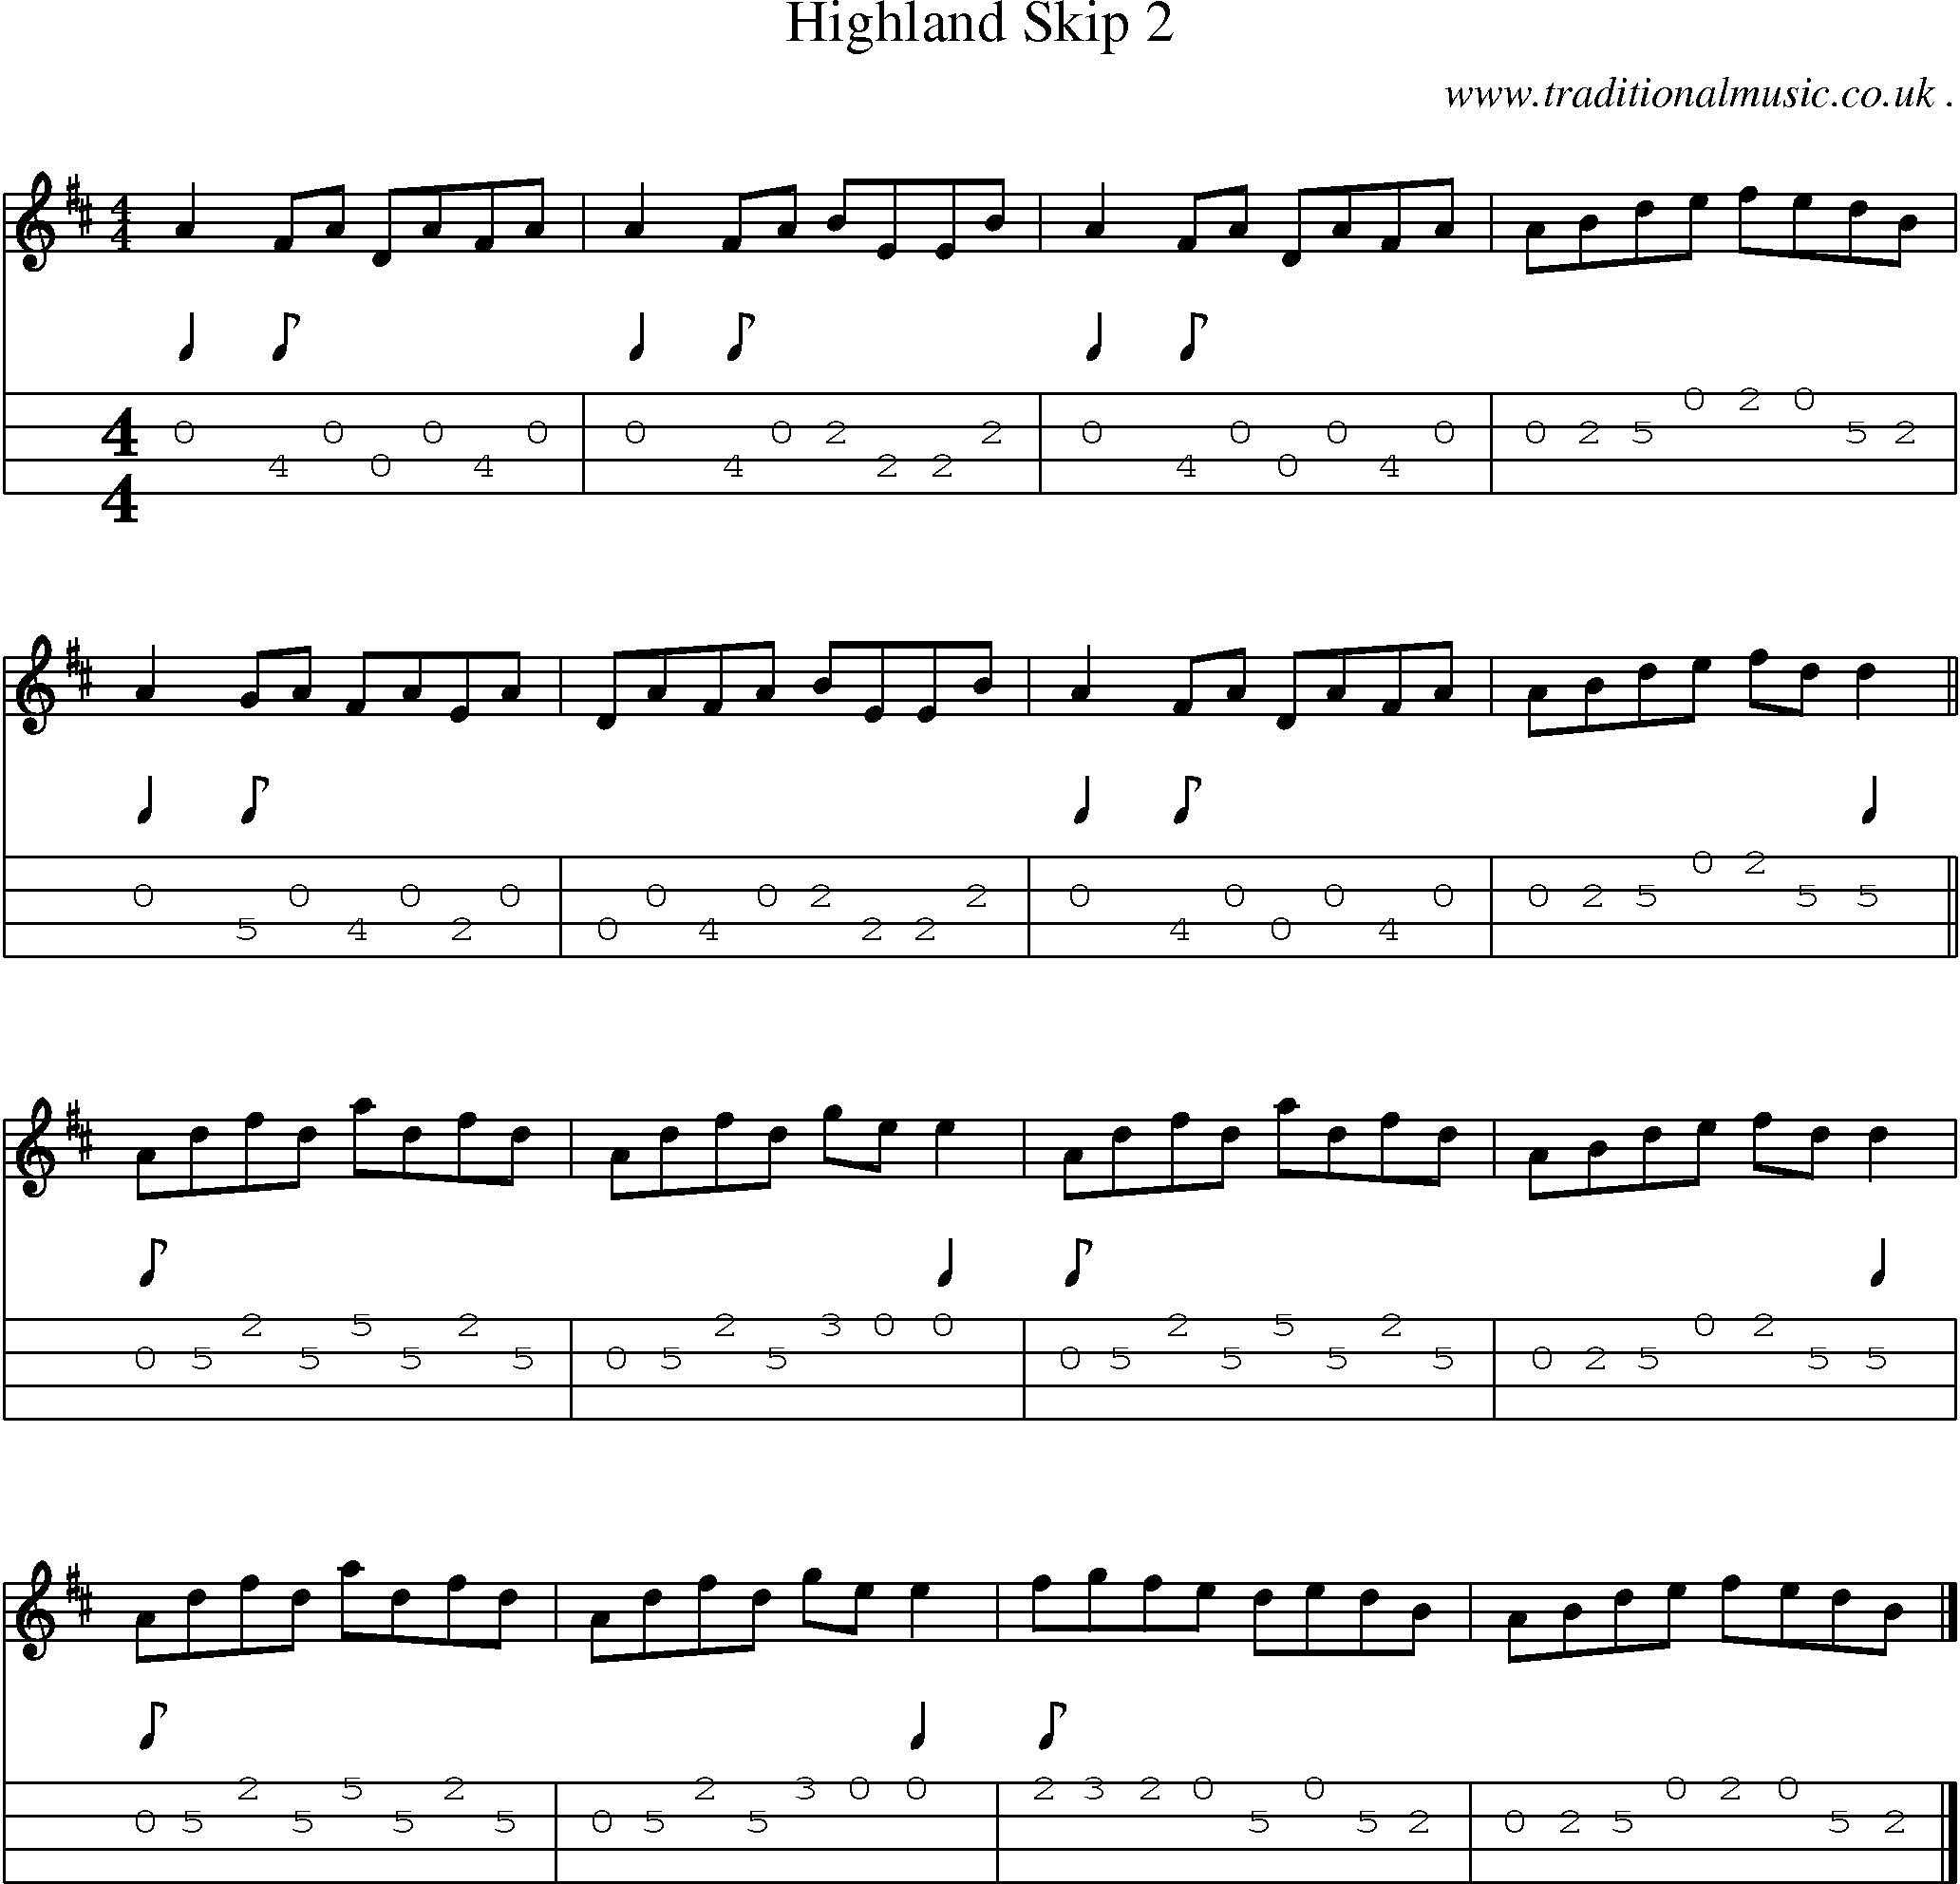 Sheet-music  score, Chords and Mandolin Tabs for Highland Skip 2